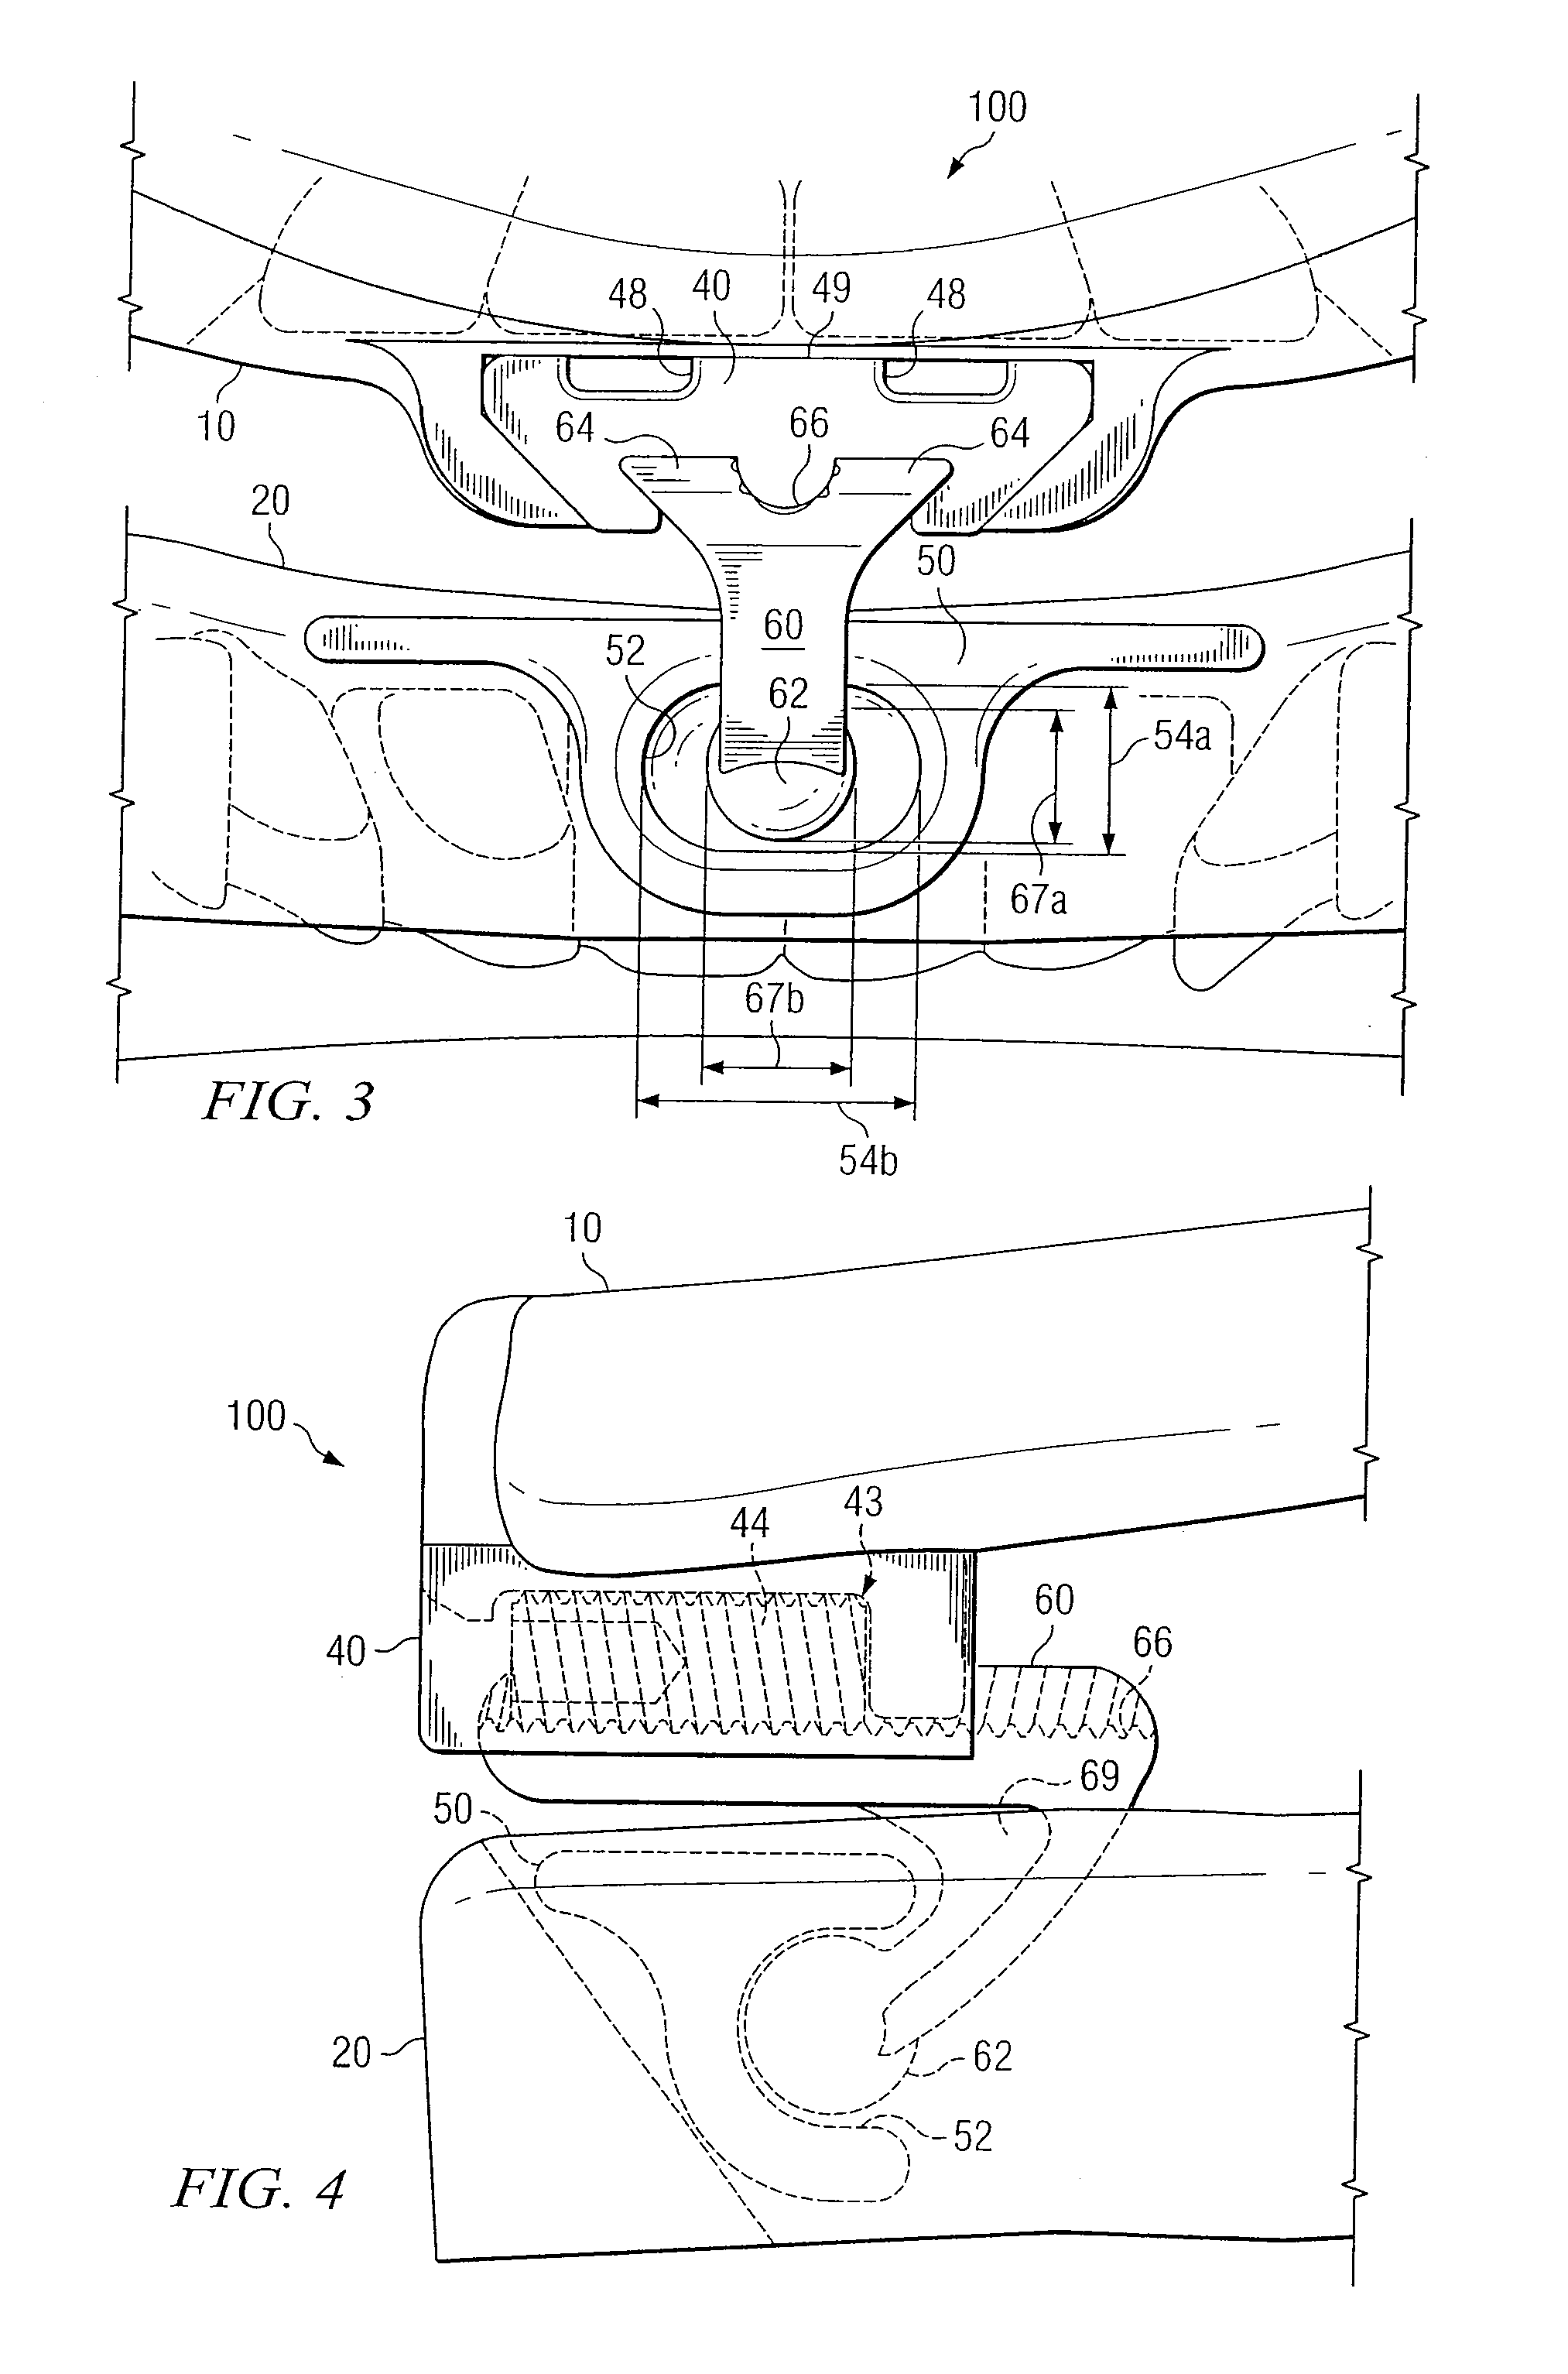 Device and Method for Improving a User's Breathing